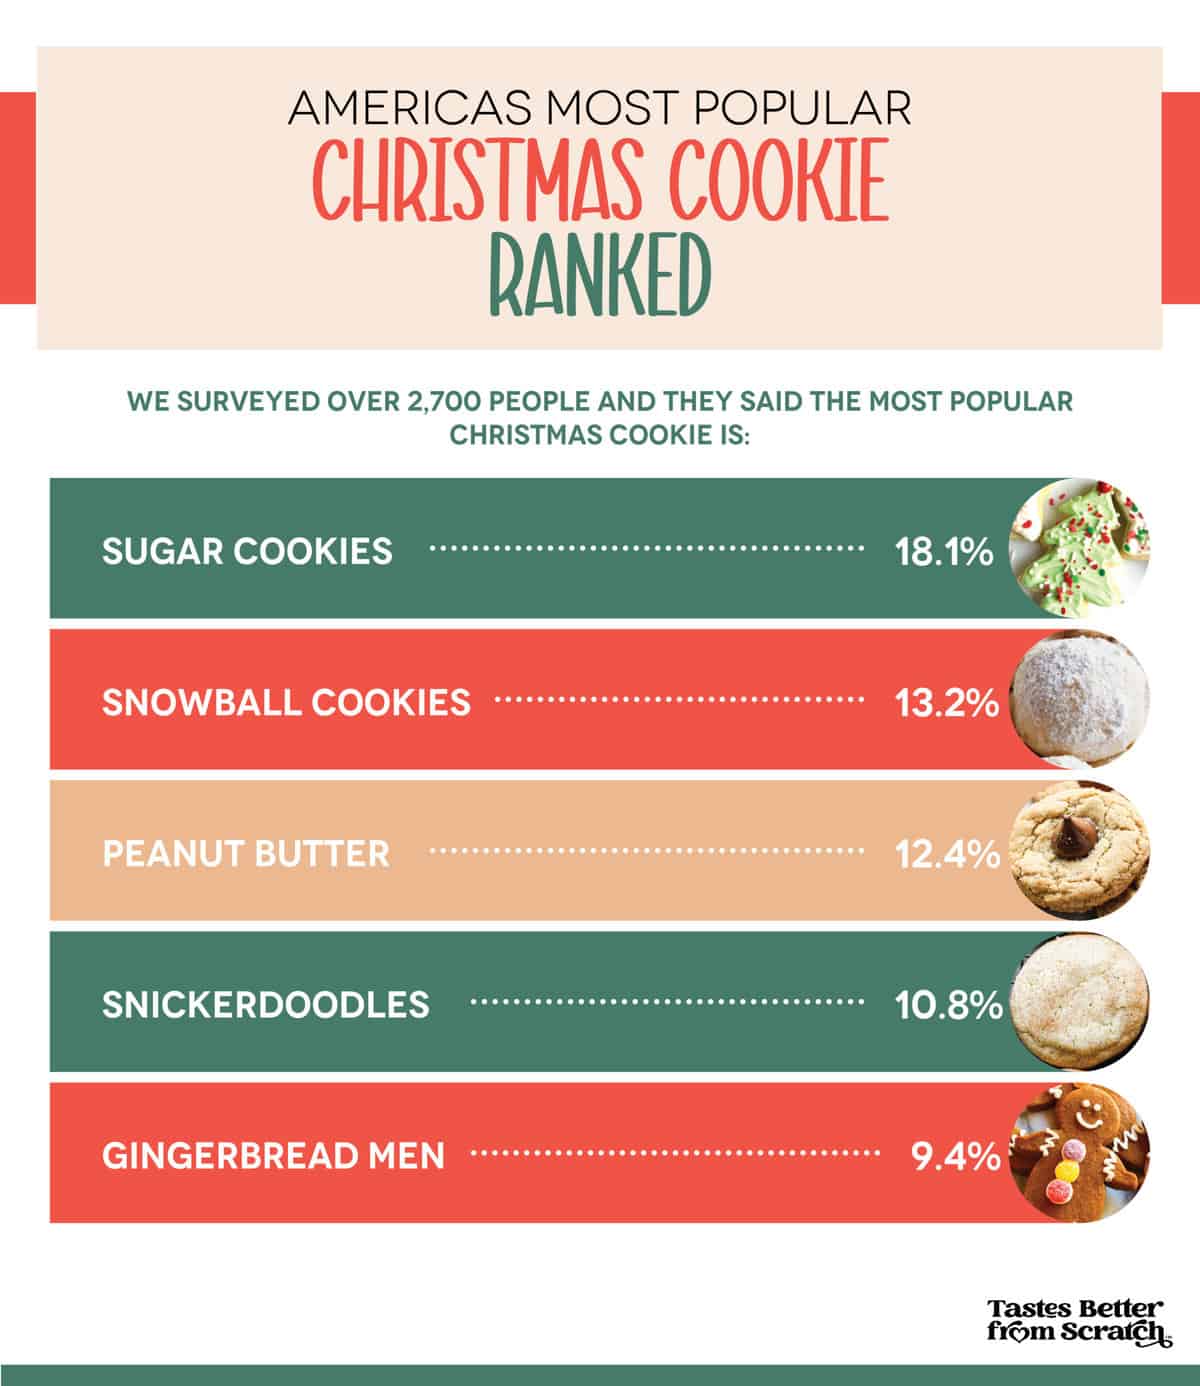 A graphic showing the top 5 favorite Christmas Cookies from a survey of over 2700 people.